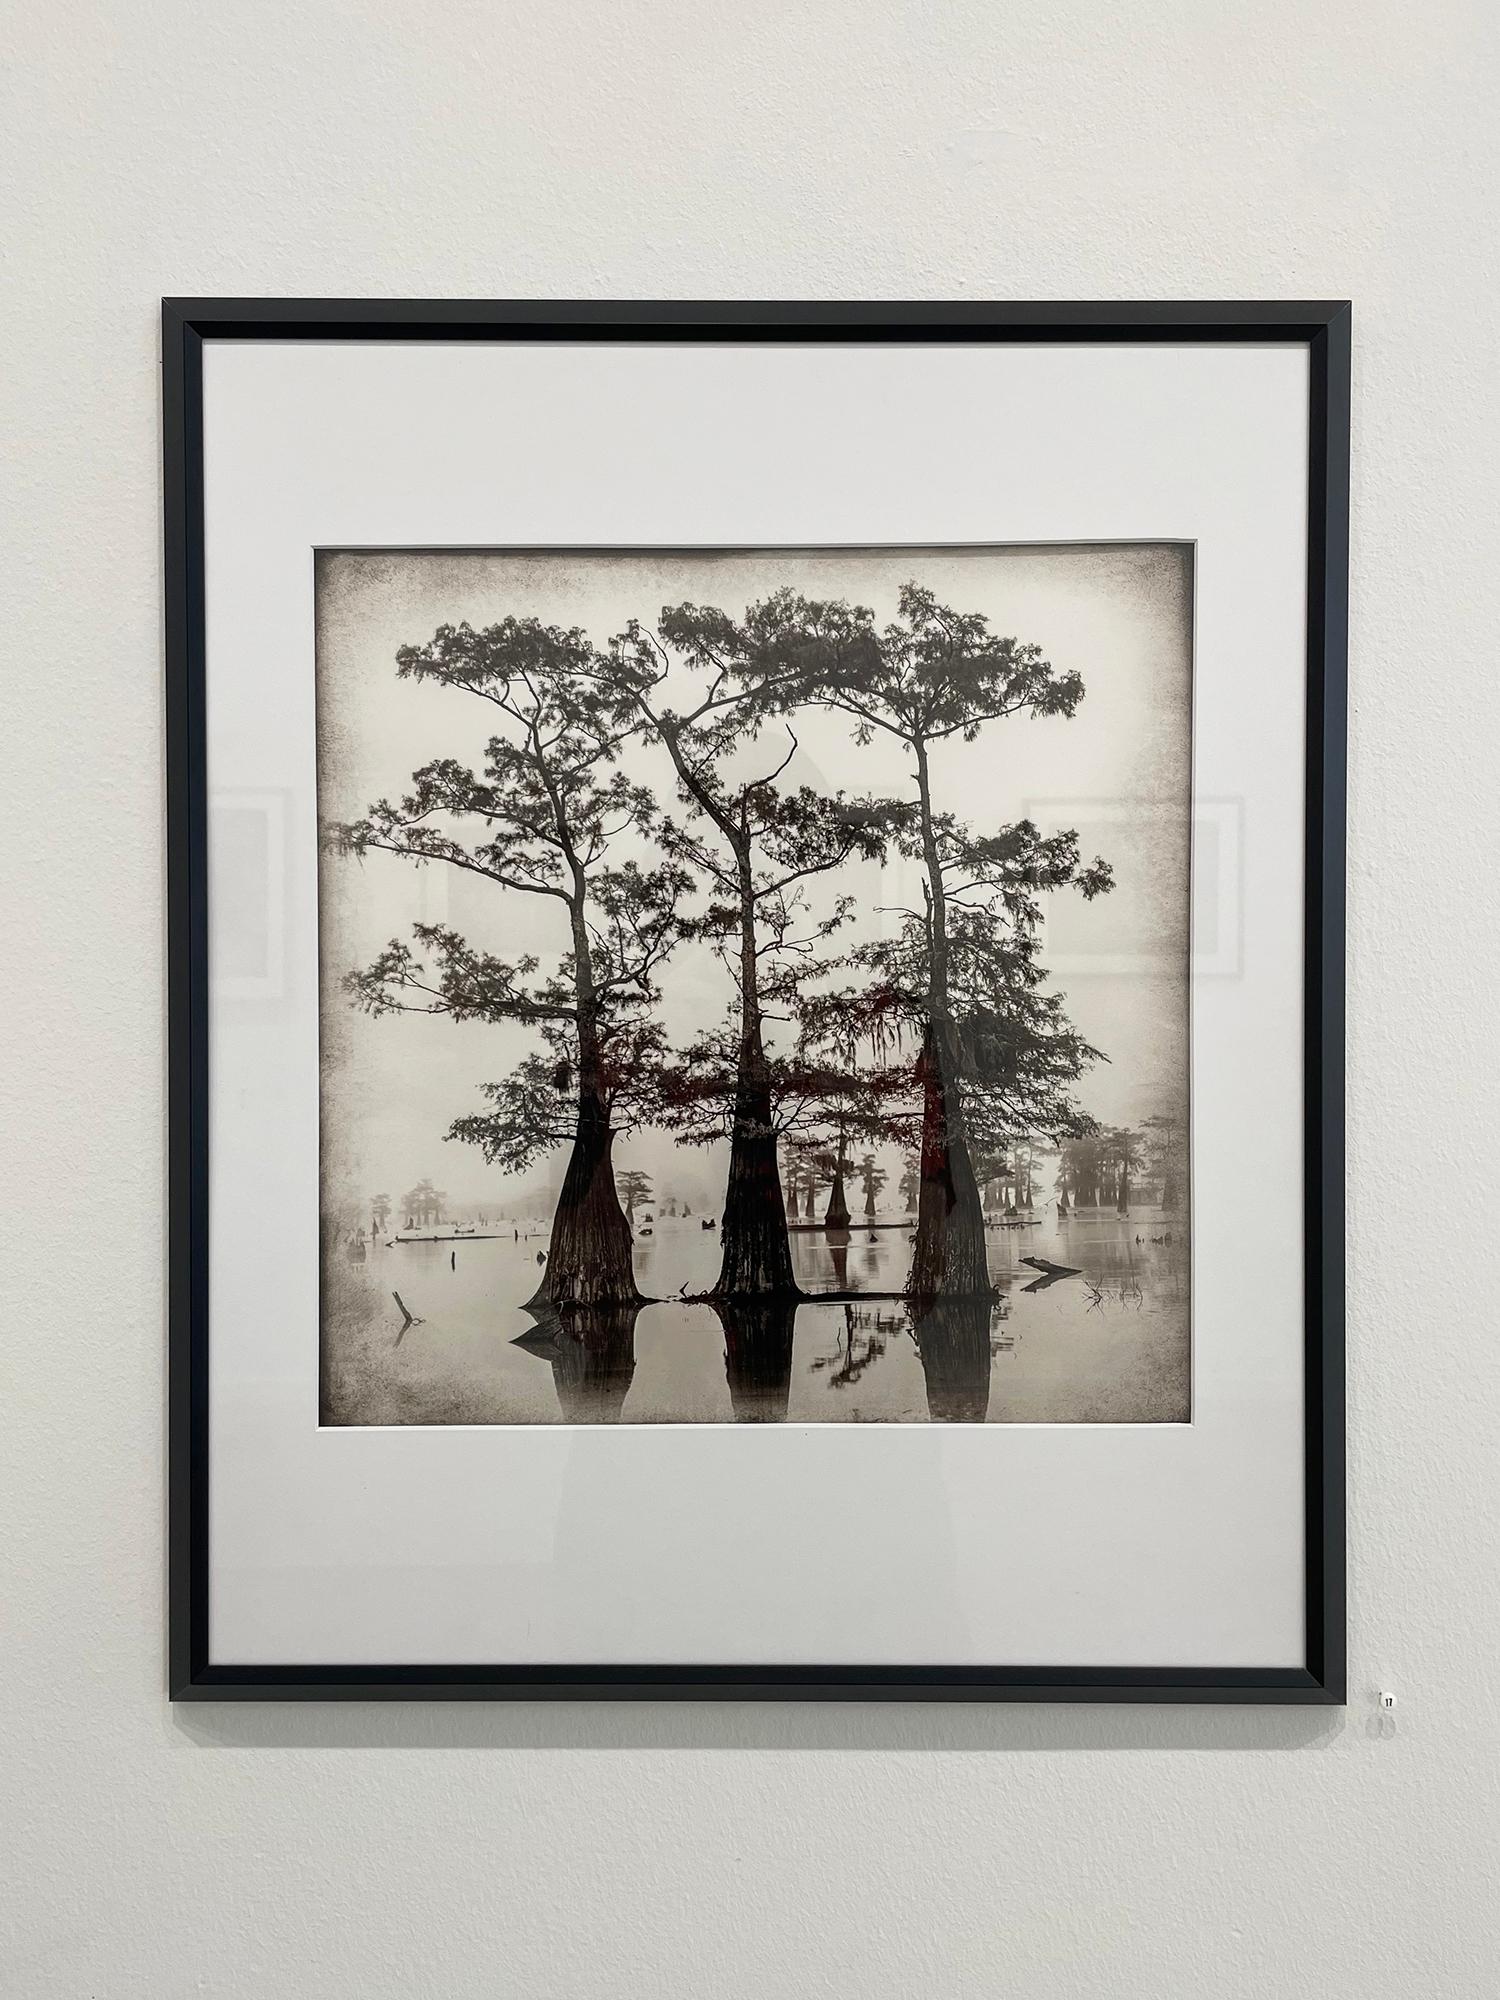 Atchafalaya Study #1 by Keith Carter, 2021, Archival Pigment Print - Photograph by Keith Carter b.1948